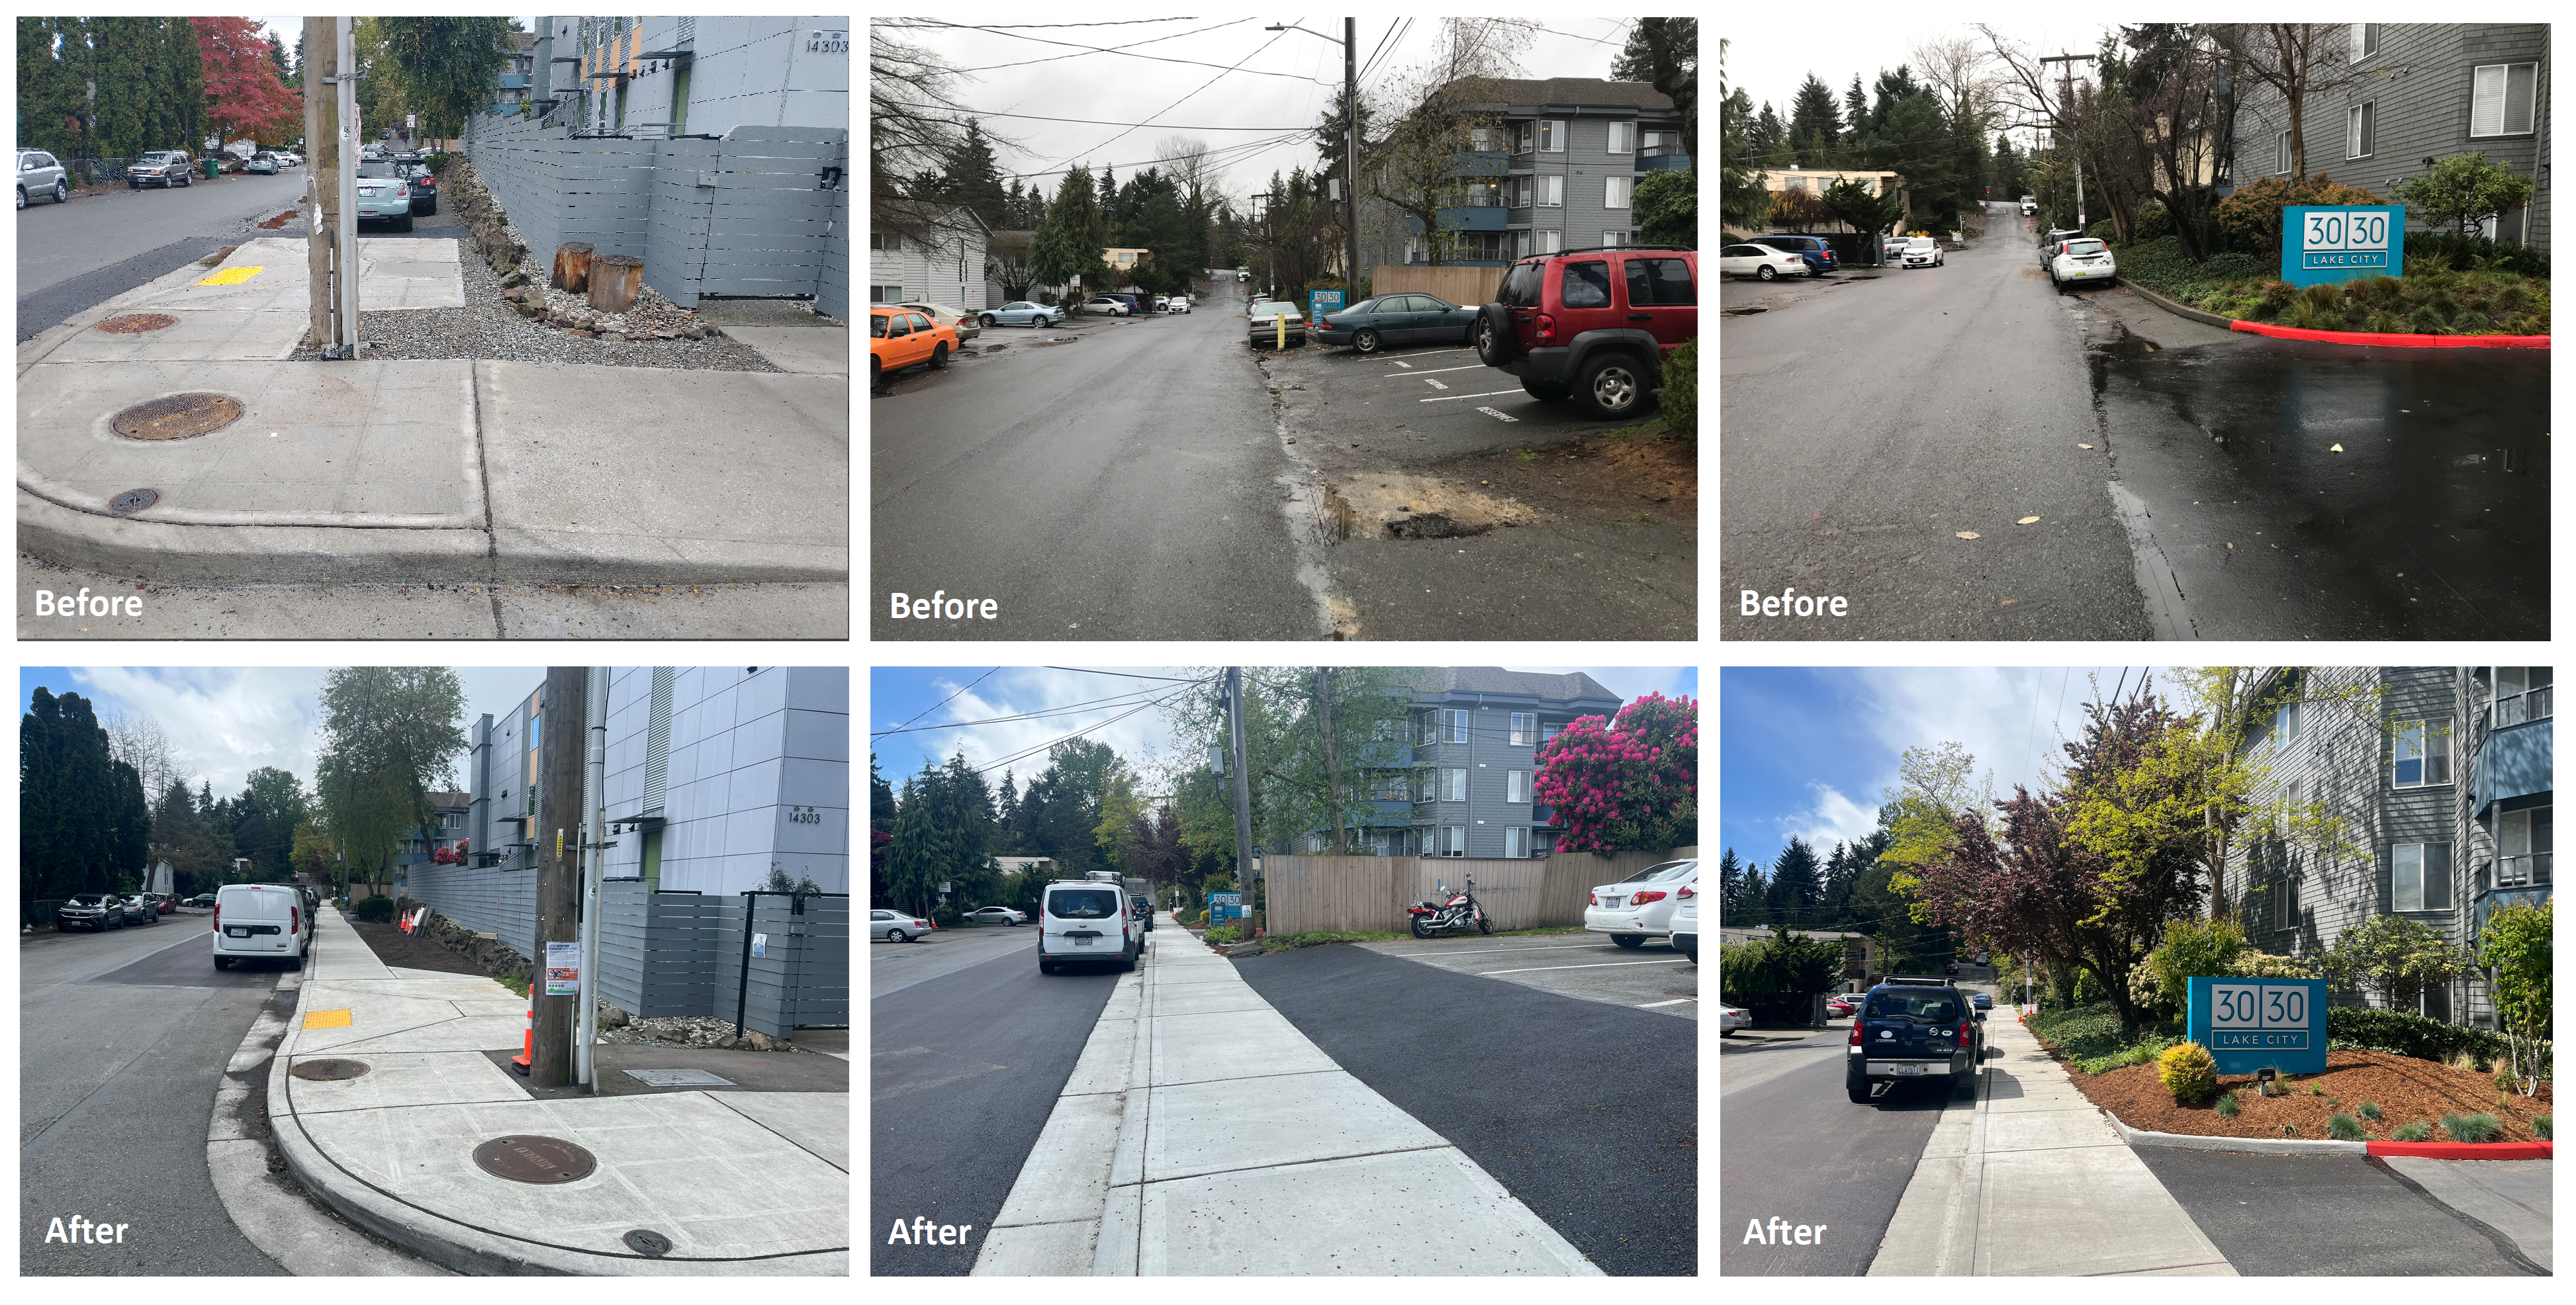 Before and After Photos: (left) Northwest corner of NE 143rd St and 32nd Ave; (middle) Rebuilt driveway on the north side of NE 143rd St, looking west; (right) New concrete sidewalk on the north side of NE 143rd St, looking west. 